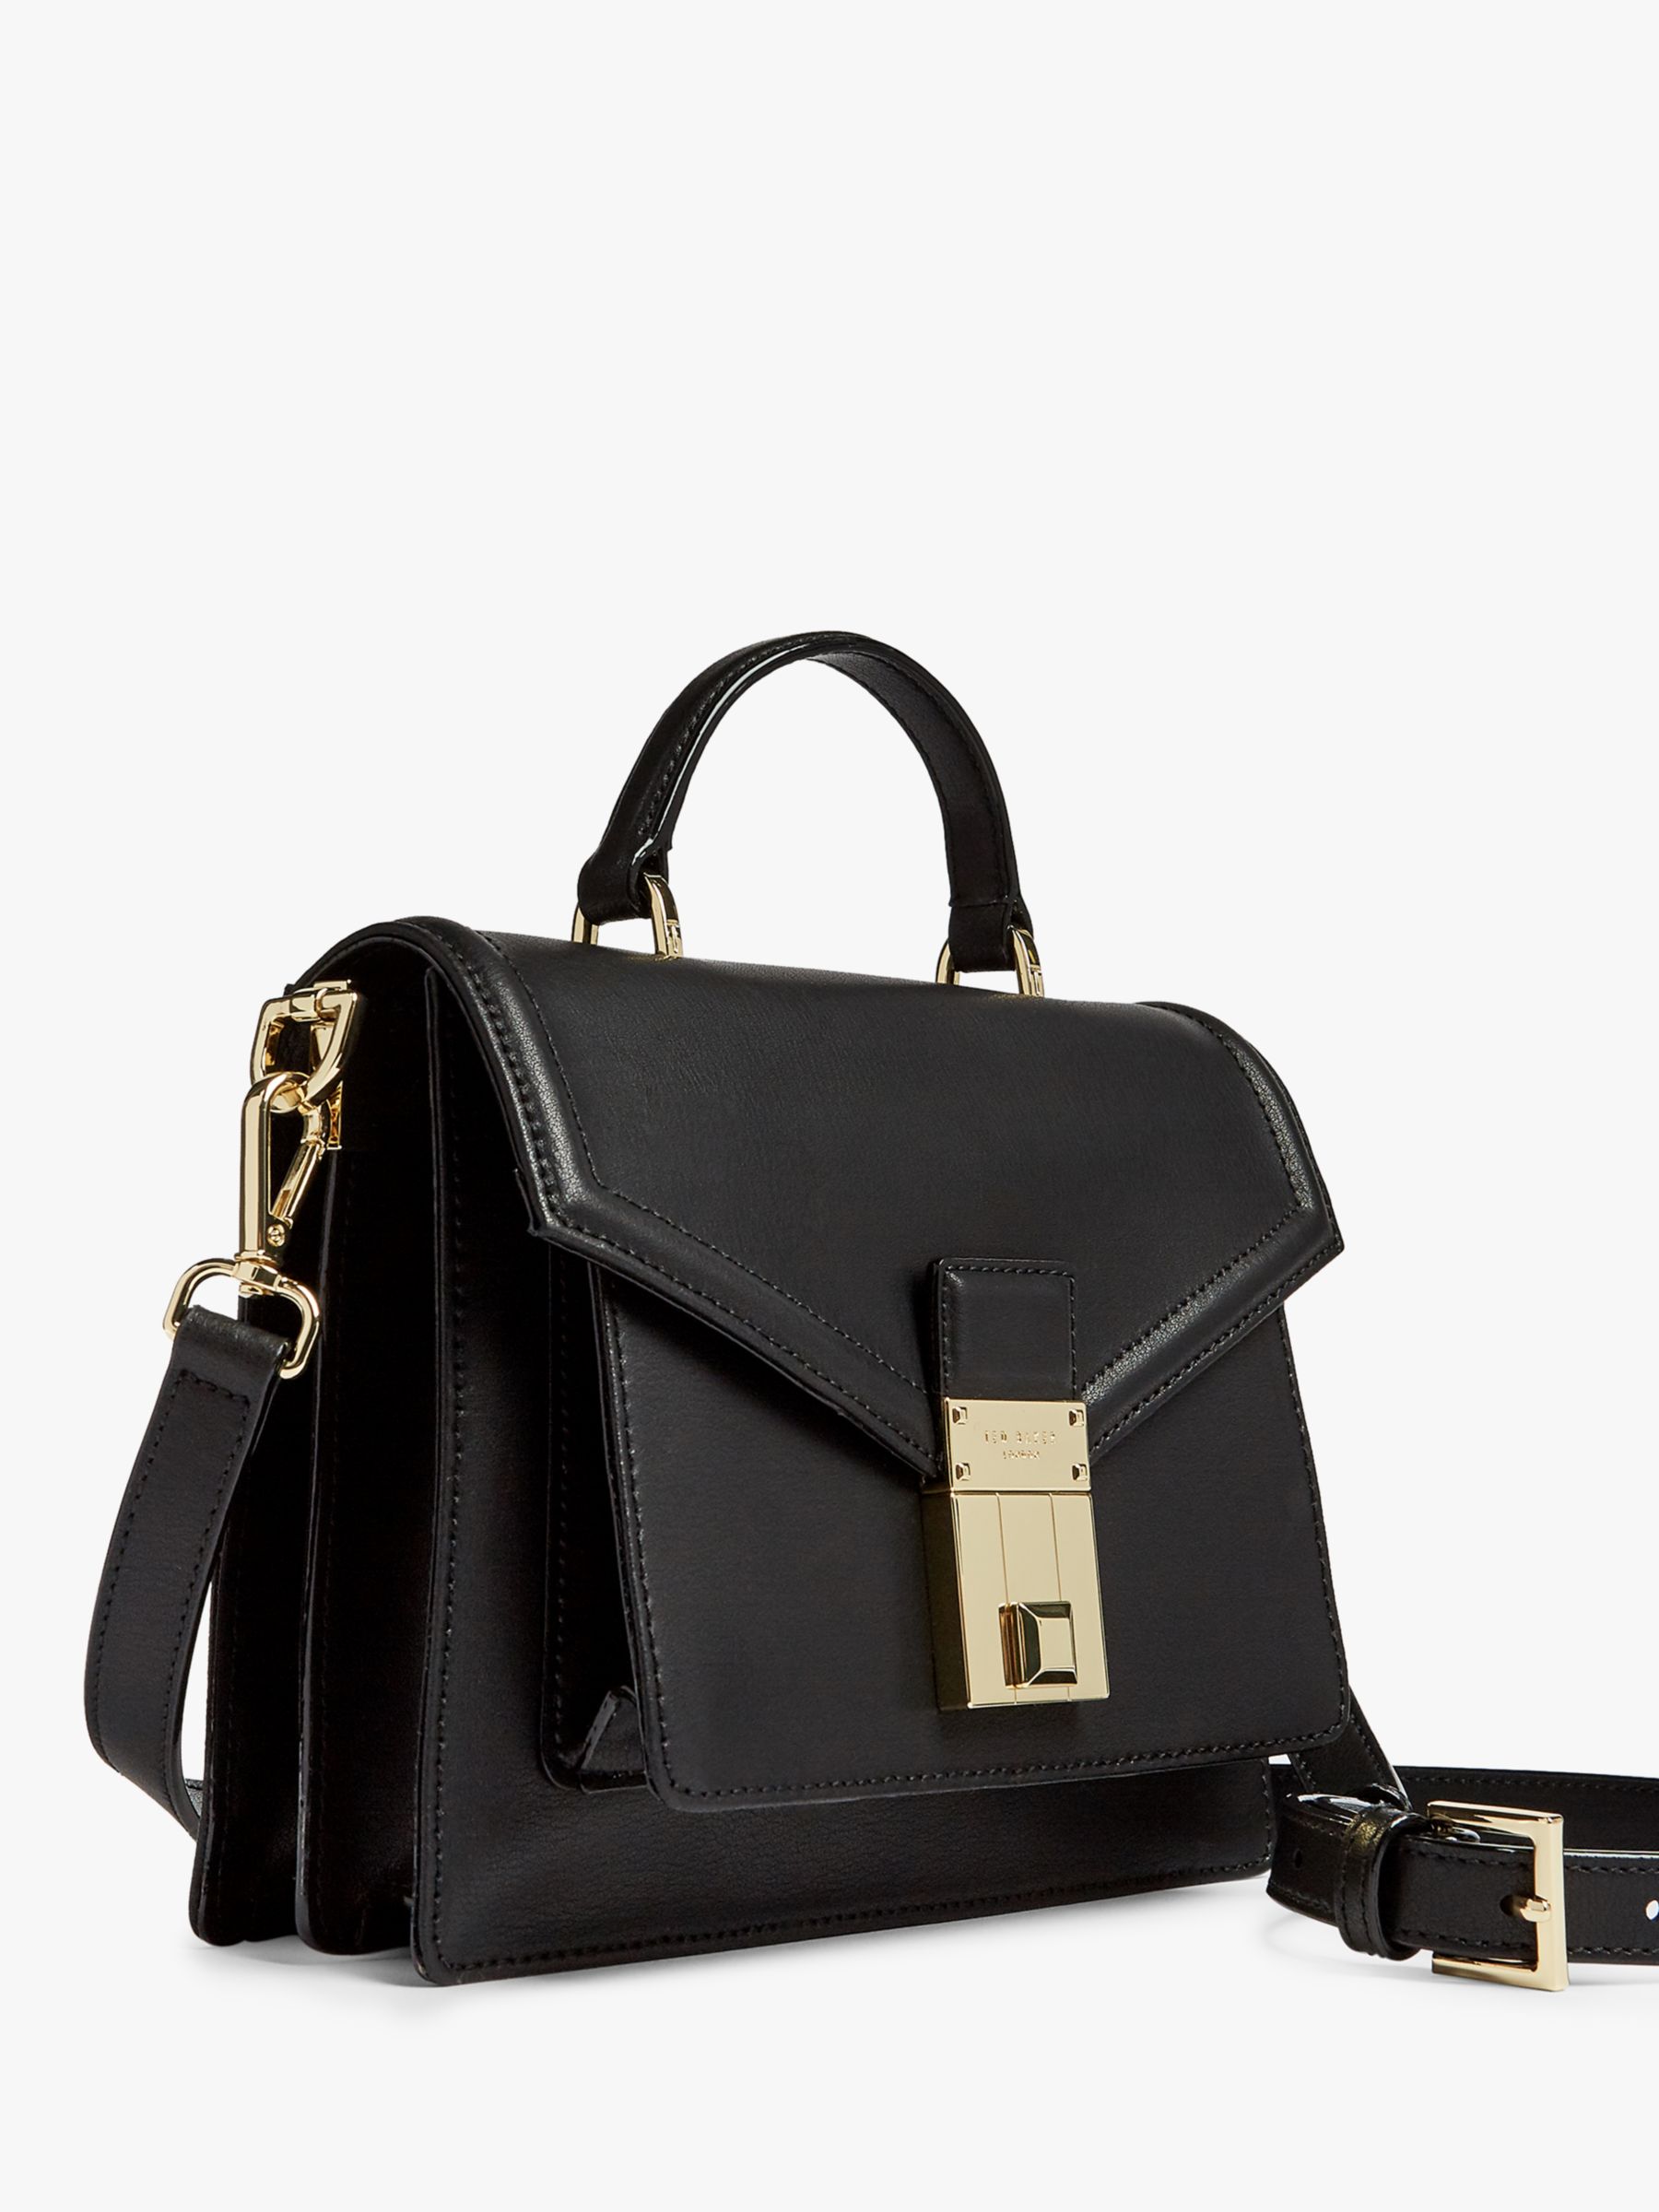 Ted Baker Kimmiee Leather Cross Body Bag, Black at John Lewis & Partners